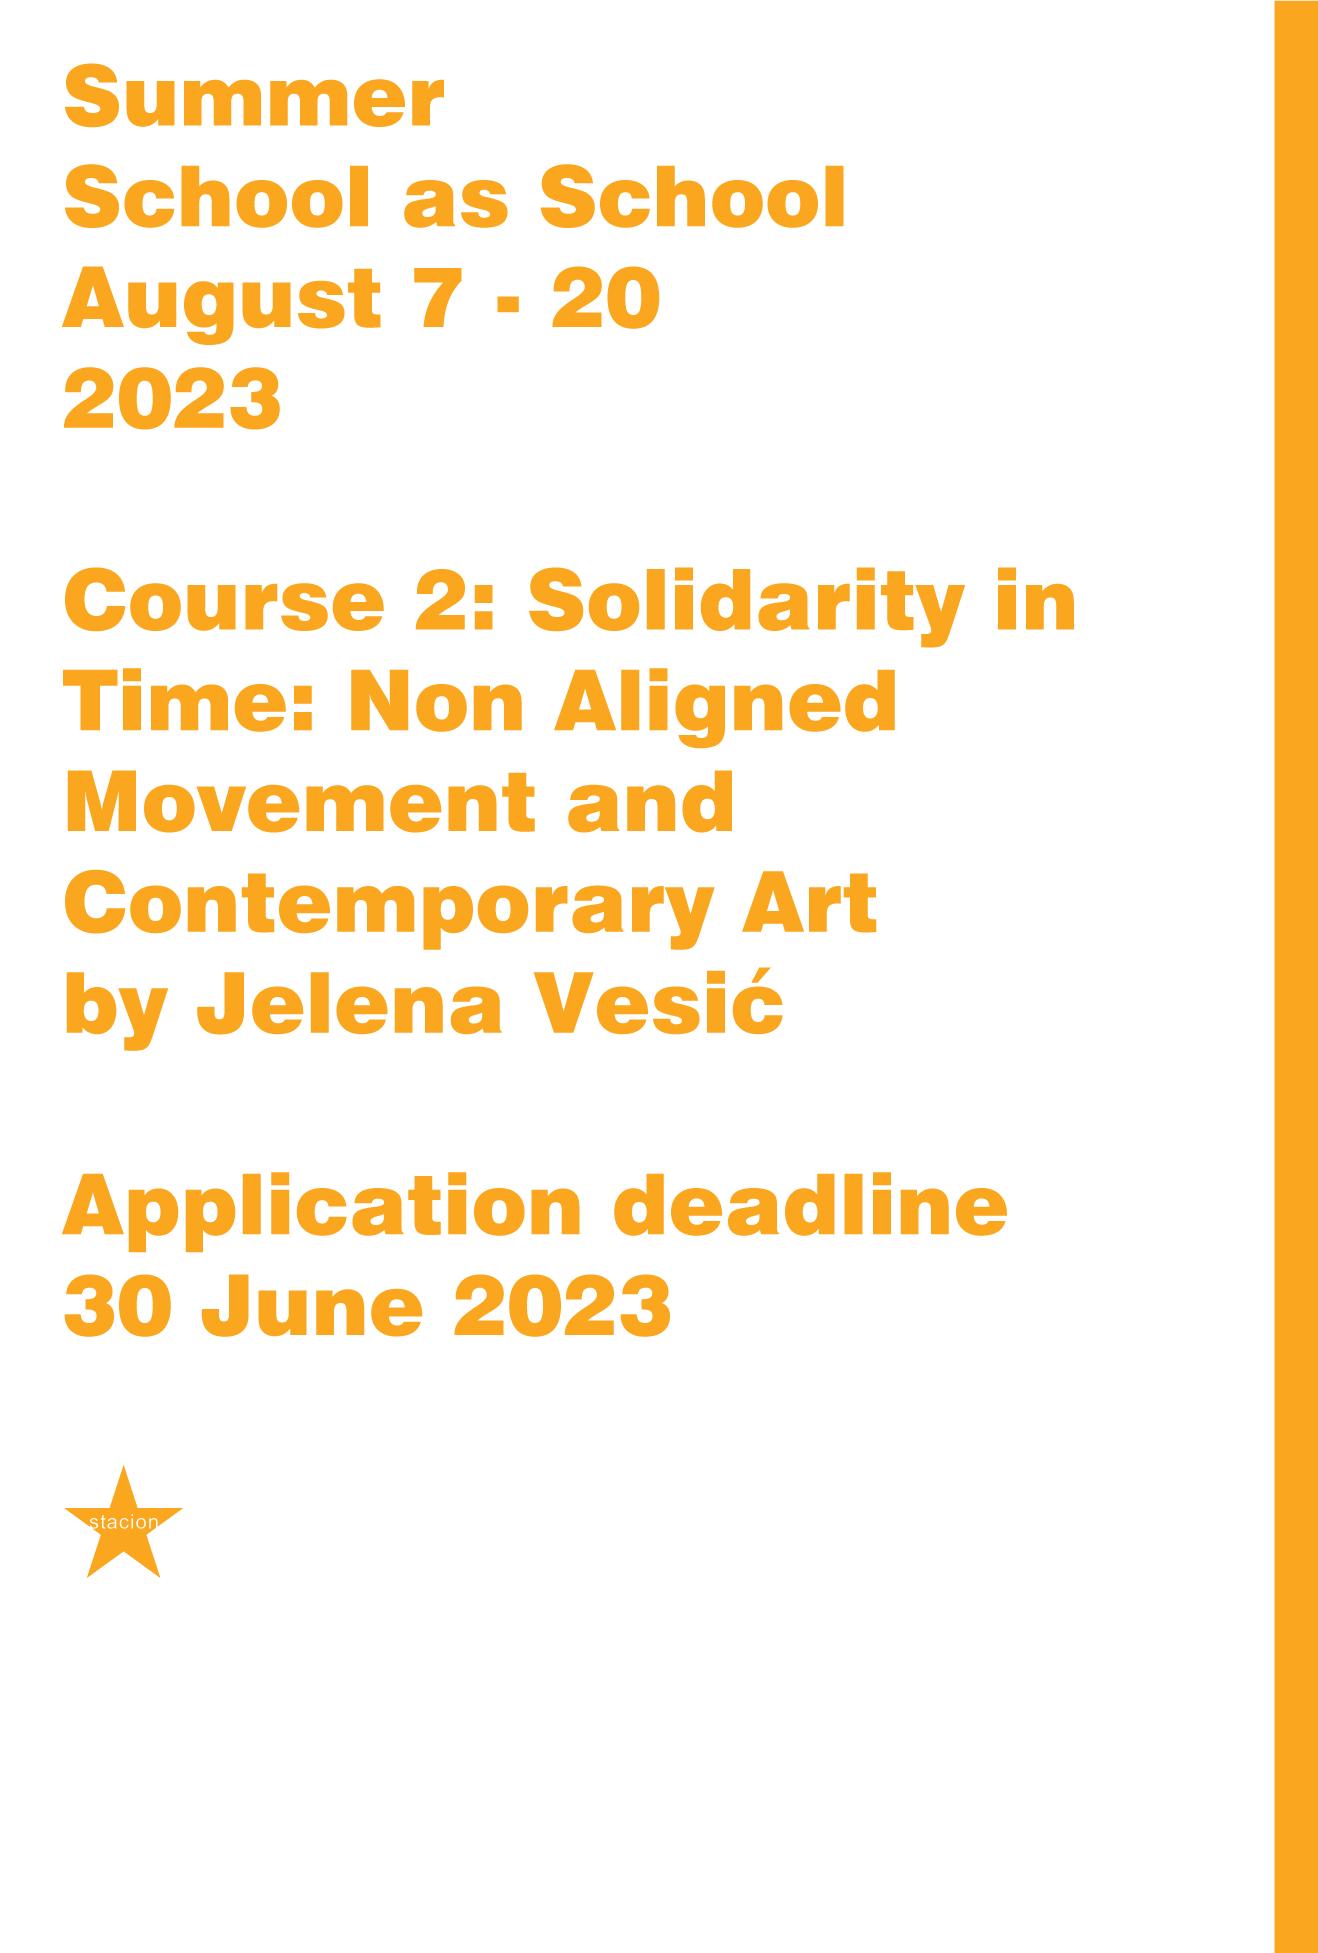 Course 2: Solidarity in Time: Non Aligned Movement and Contemporary Art